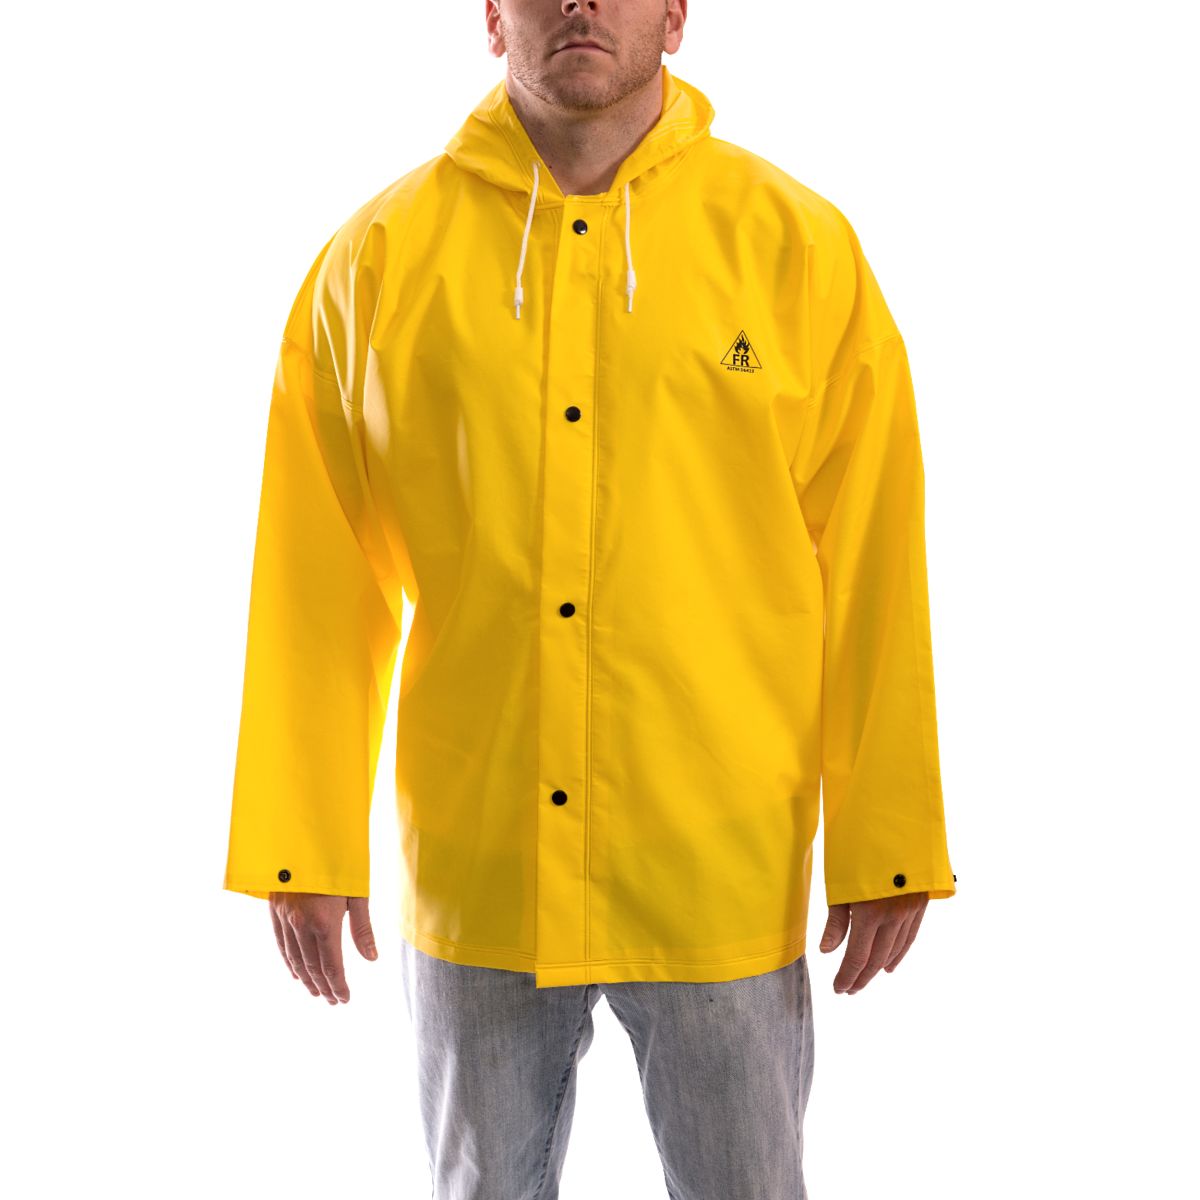 Rain Jacket, Yellow - Storm Fly Front – Attached Hood — 2XL